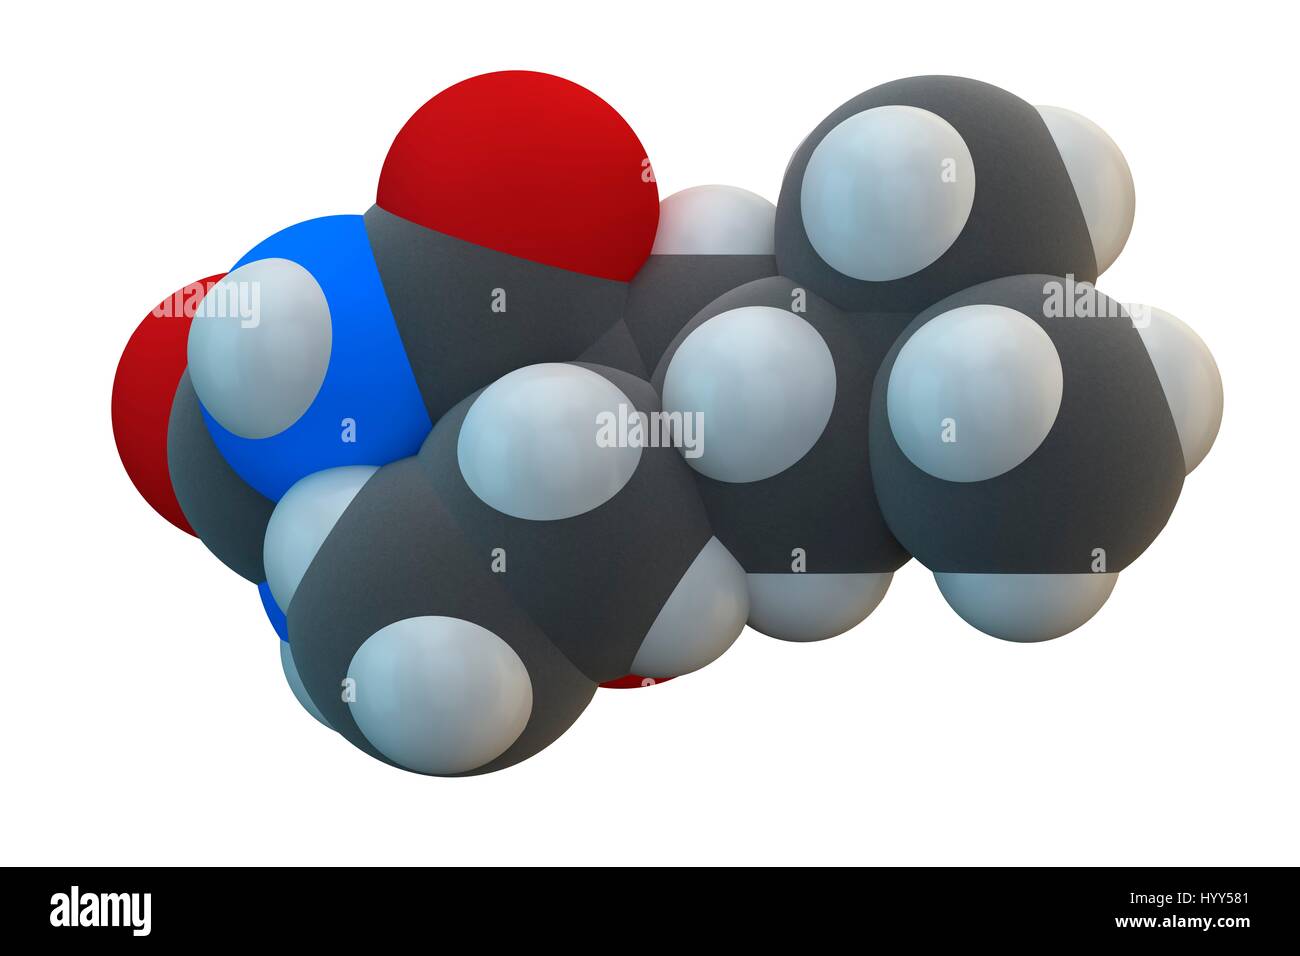 Molecular model of the barbiturate derivative amobarbital. First synthesized in Germany in 1923, amobarbital has sedative-hypnotic properties. Chemical formula is C11H18N2O3. Atoms are represented as spheres: carbon (grey), hydrogen (white), nitrogen (blue), oxygen (red). Illustration. Stock Photo